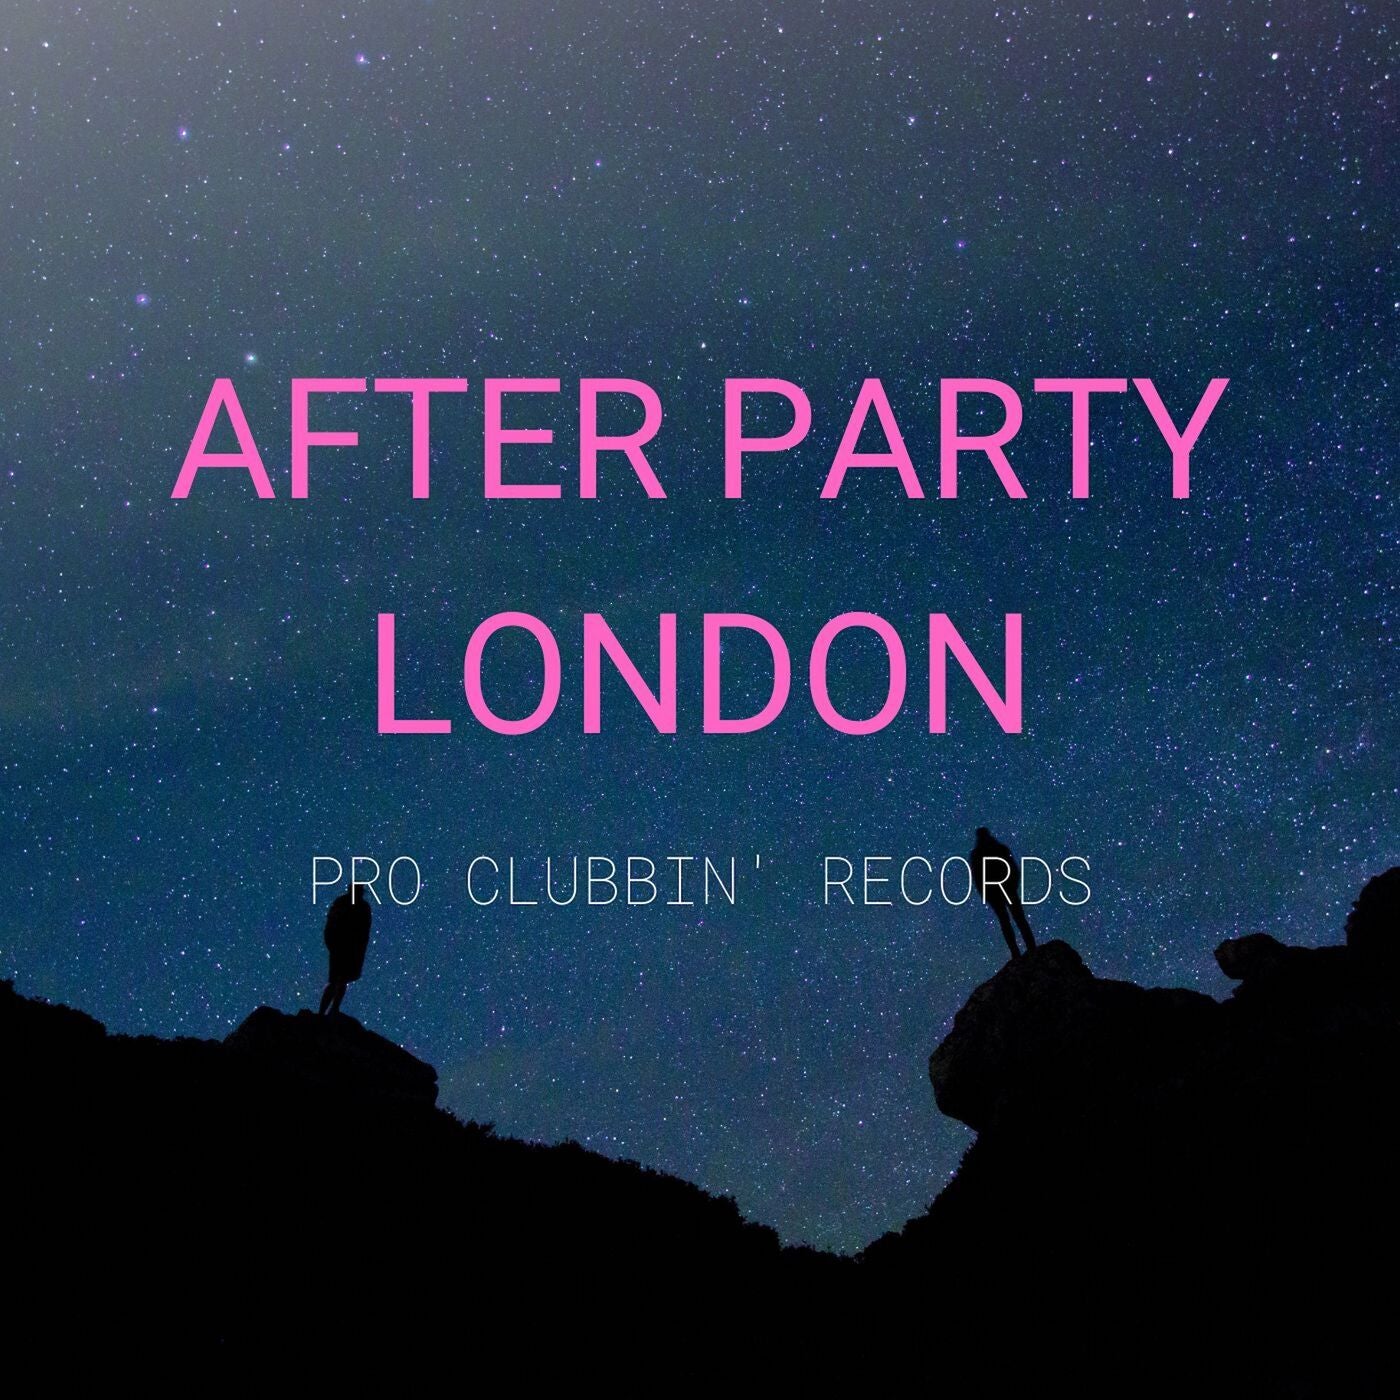 After Party London